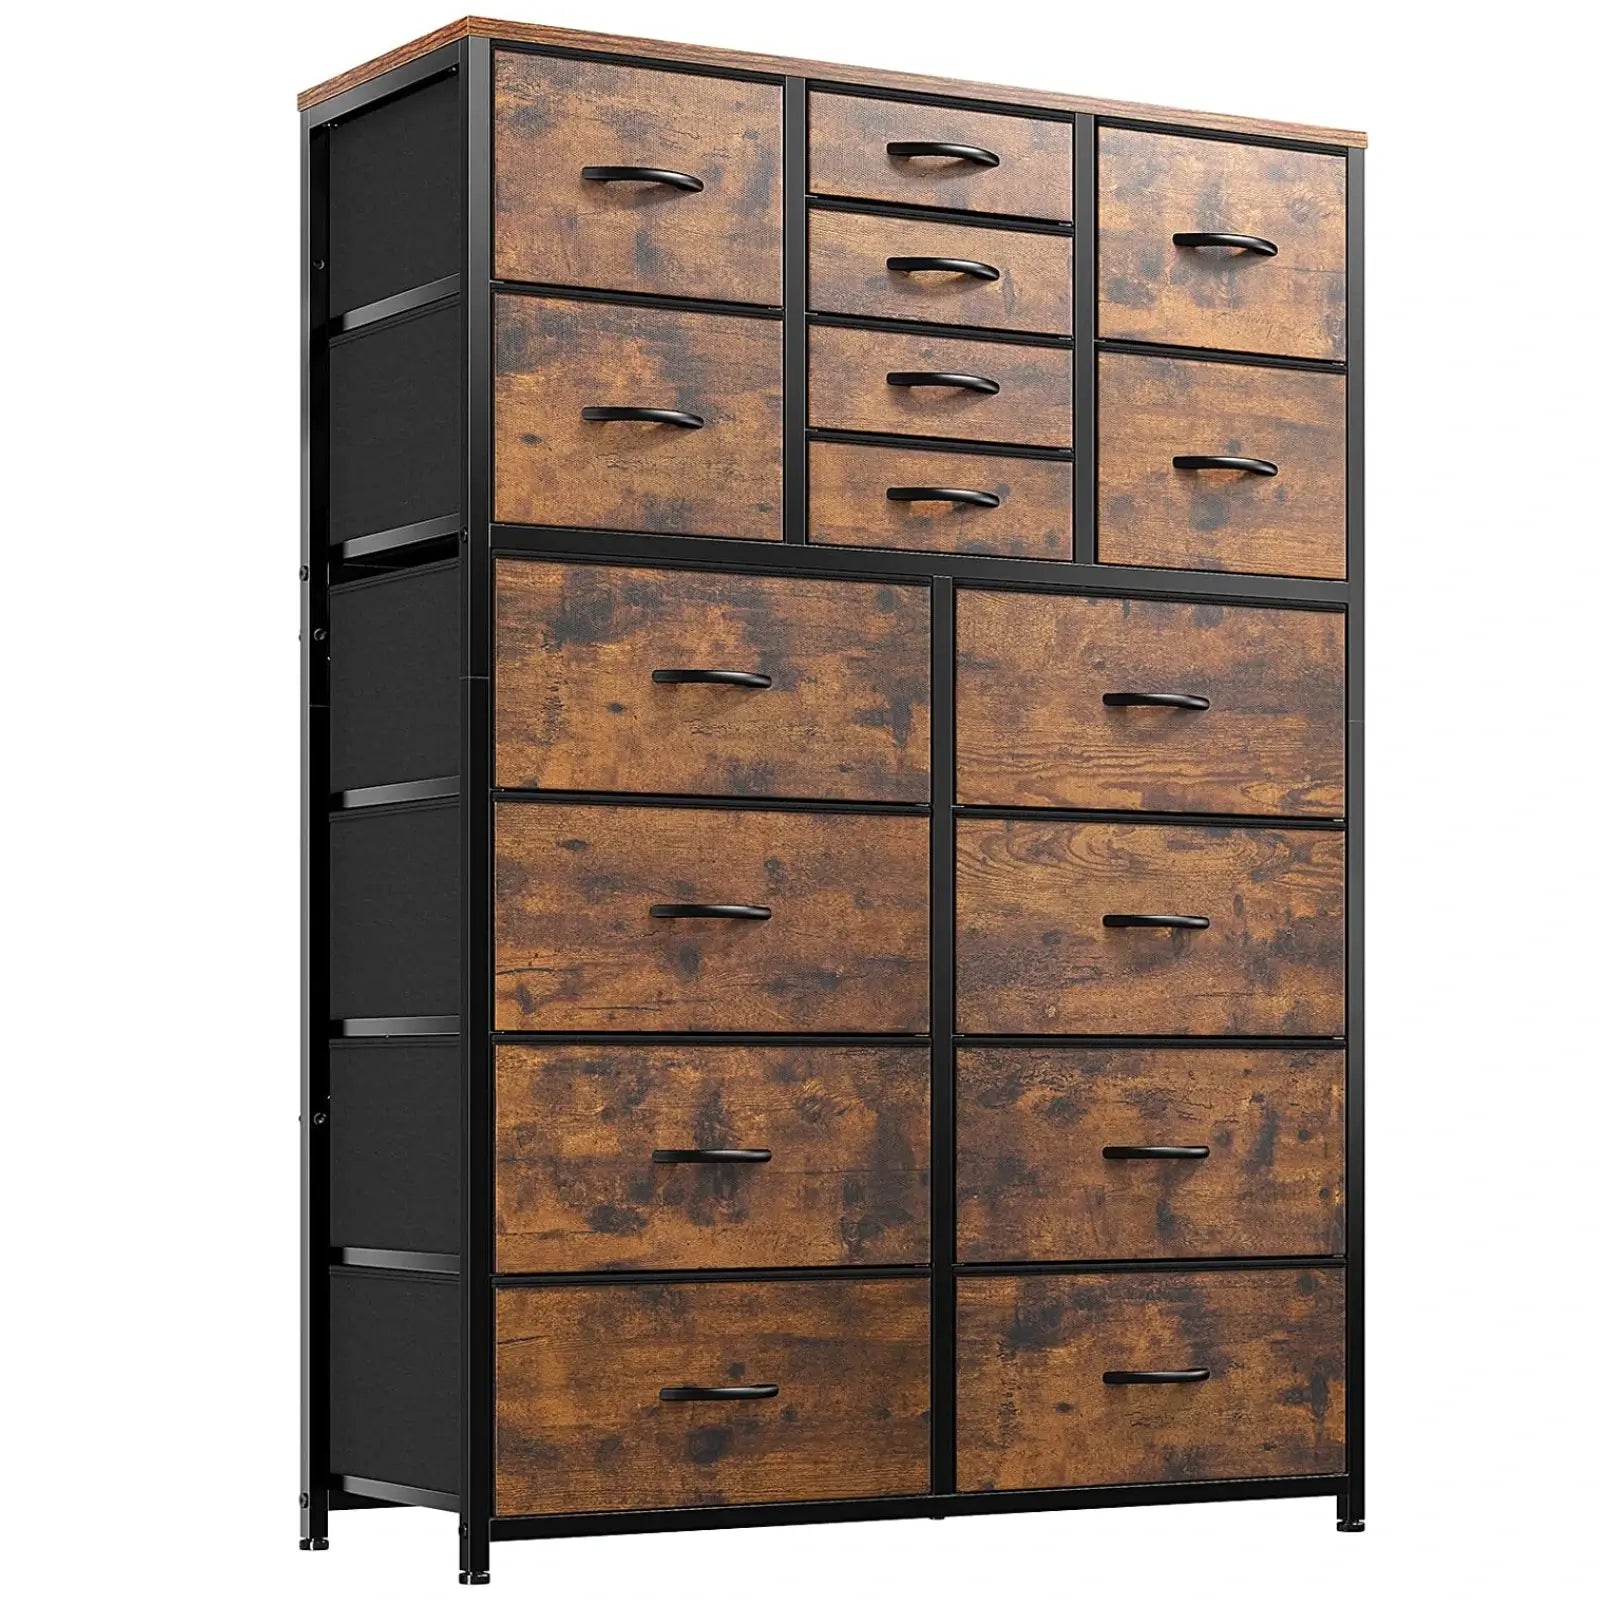 Enhomee 16 drawers tall dresser for bedroom